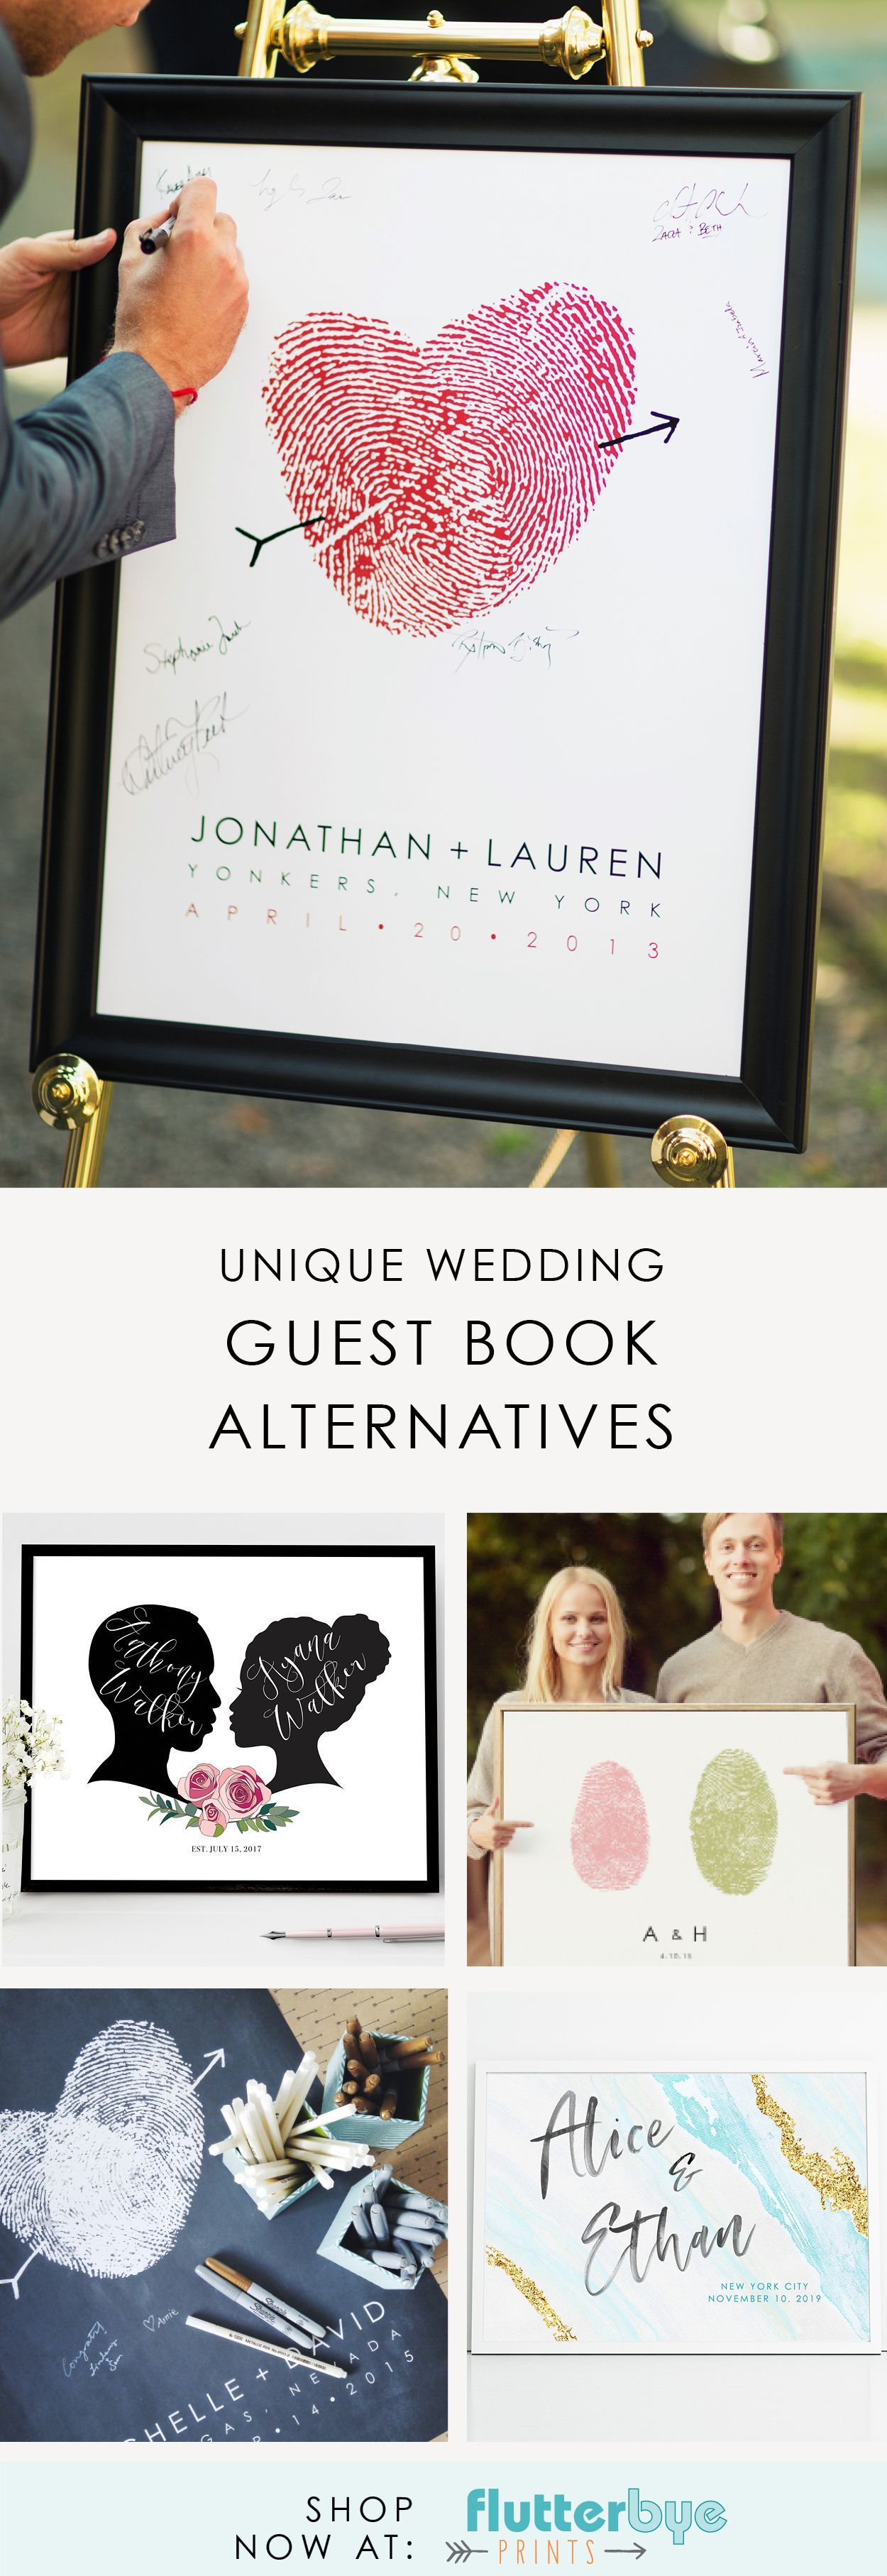 Unique Wedding Guest Book Alternatives, Fun and Creative Ideas for your Wedding Reception Guestbook -   11 Event Planning Themes guest books ideas